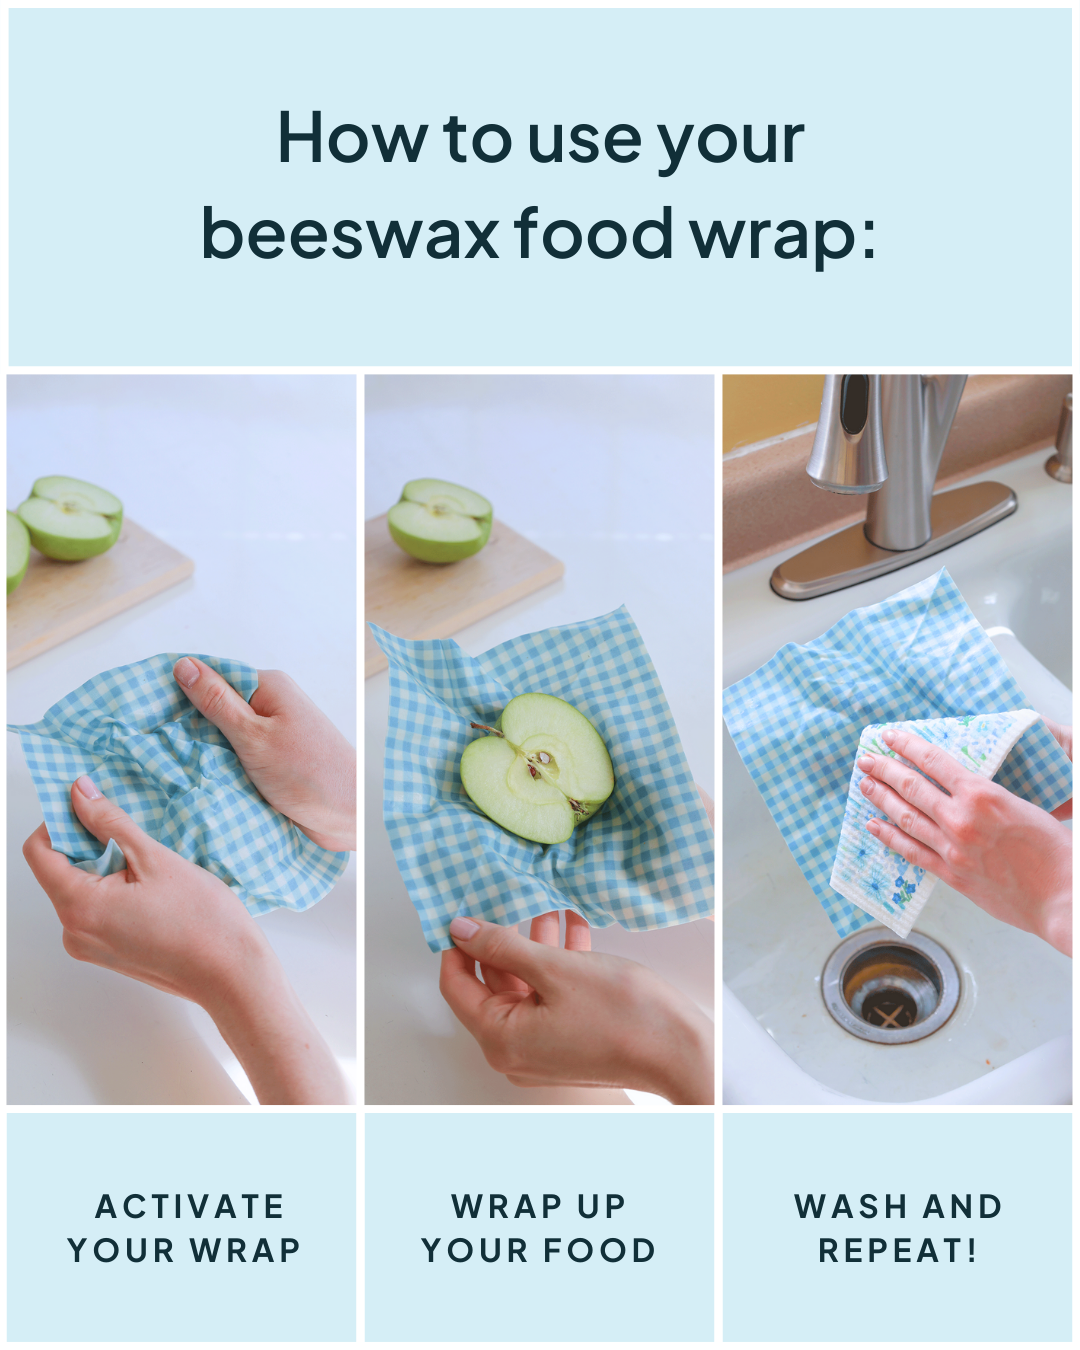 Beeswax Wrap Variety Set - Blue | Nature Bee